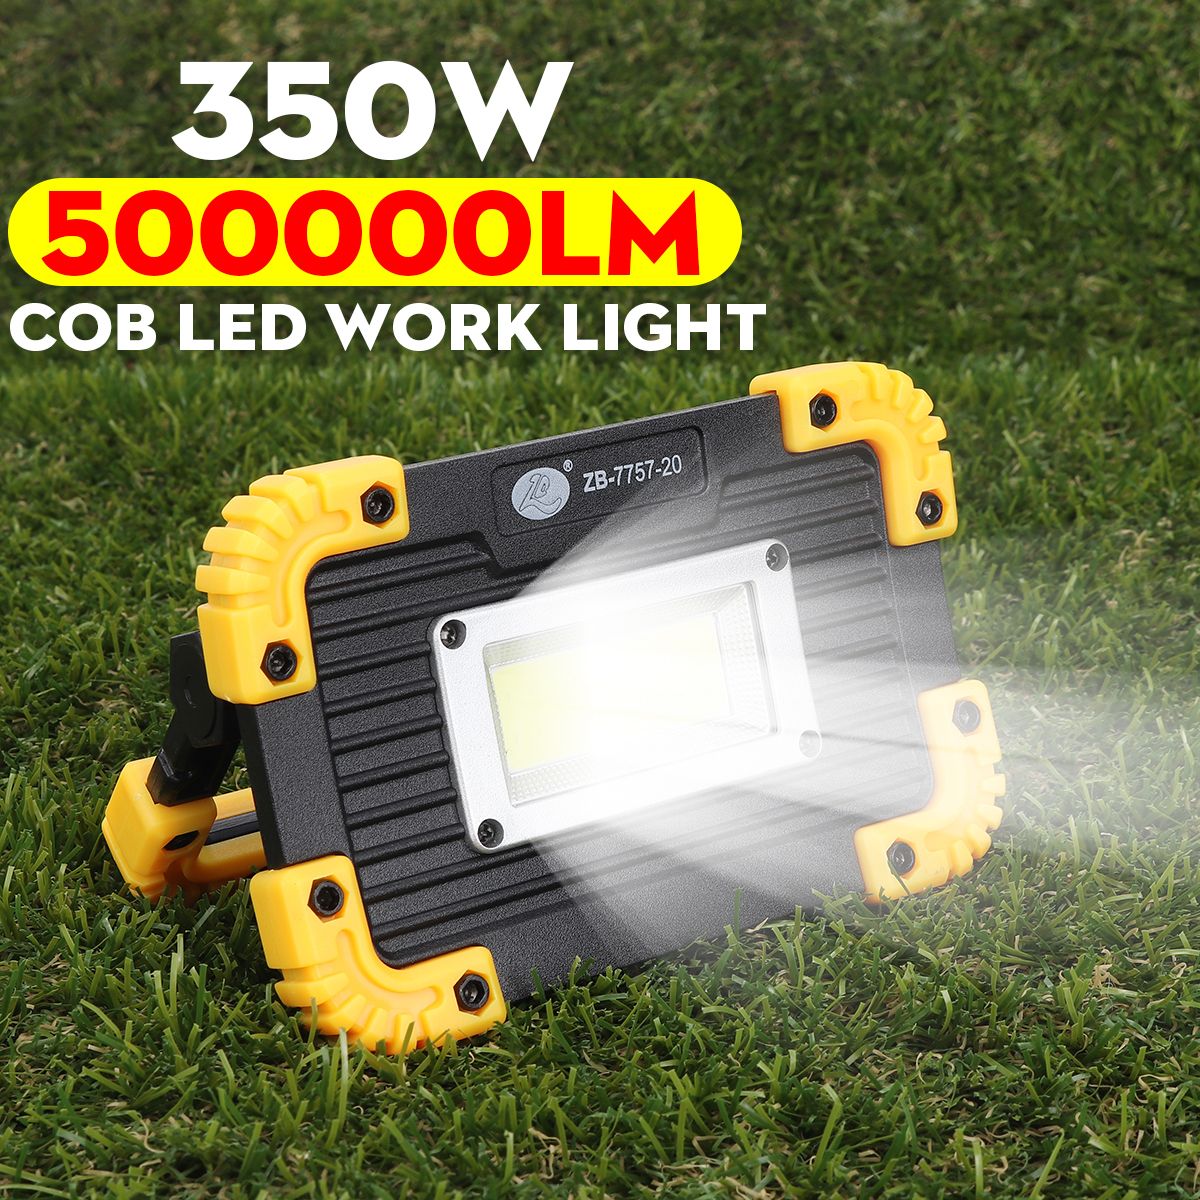 3-Mode-Outdoor-COB-LED-Floodlight-Spot-Work-Lamp-Camping-Hiking-Battery-Powered-1741719